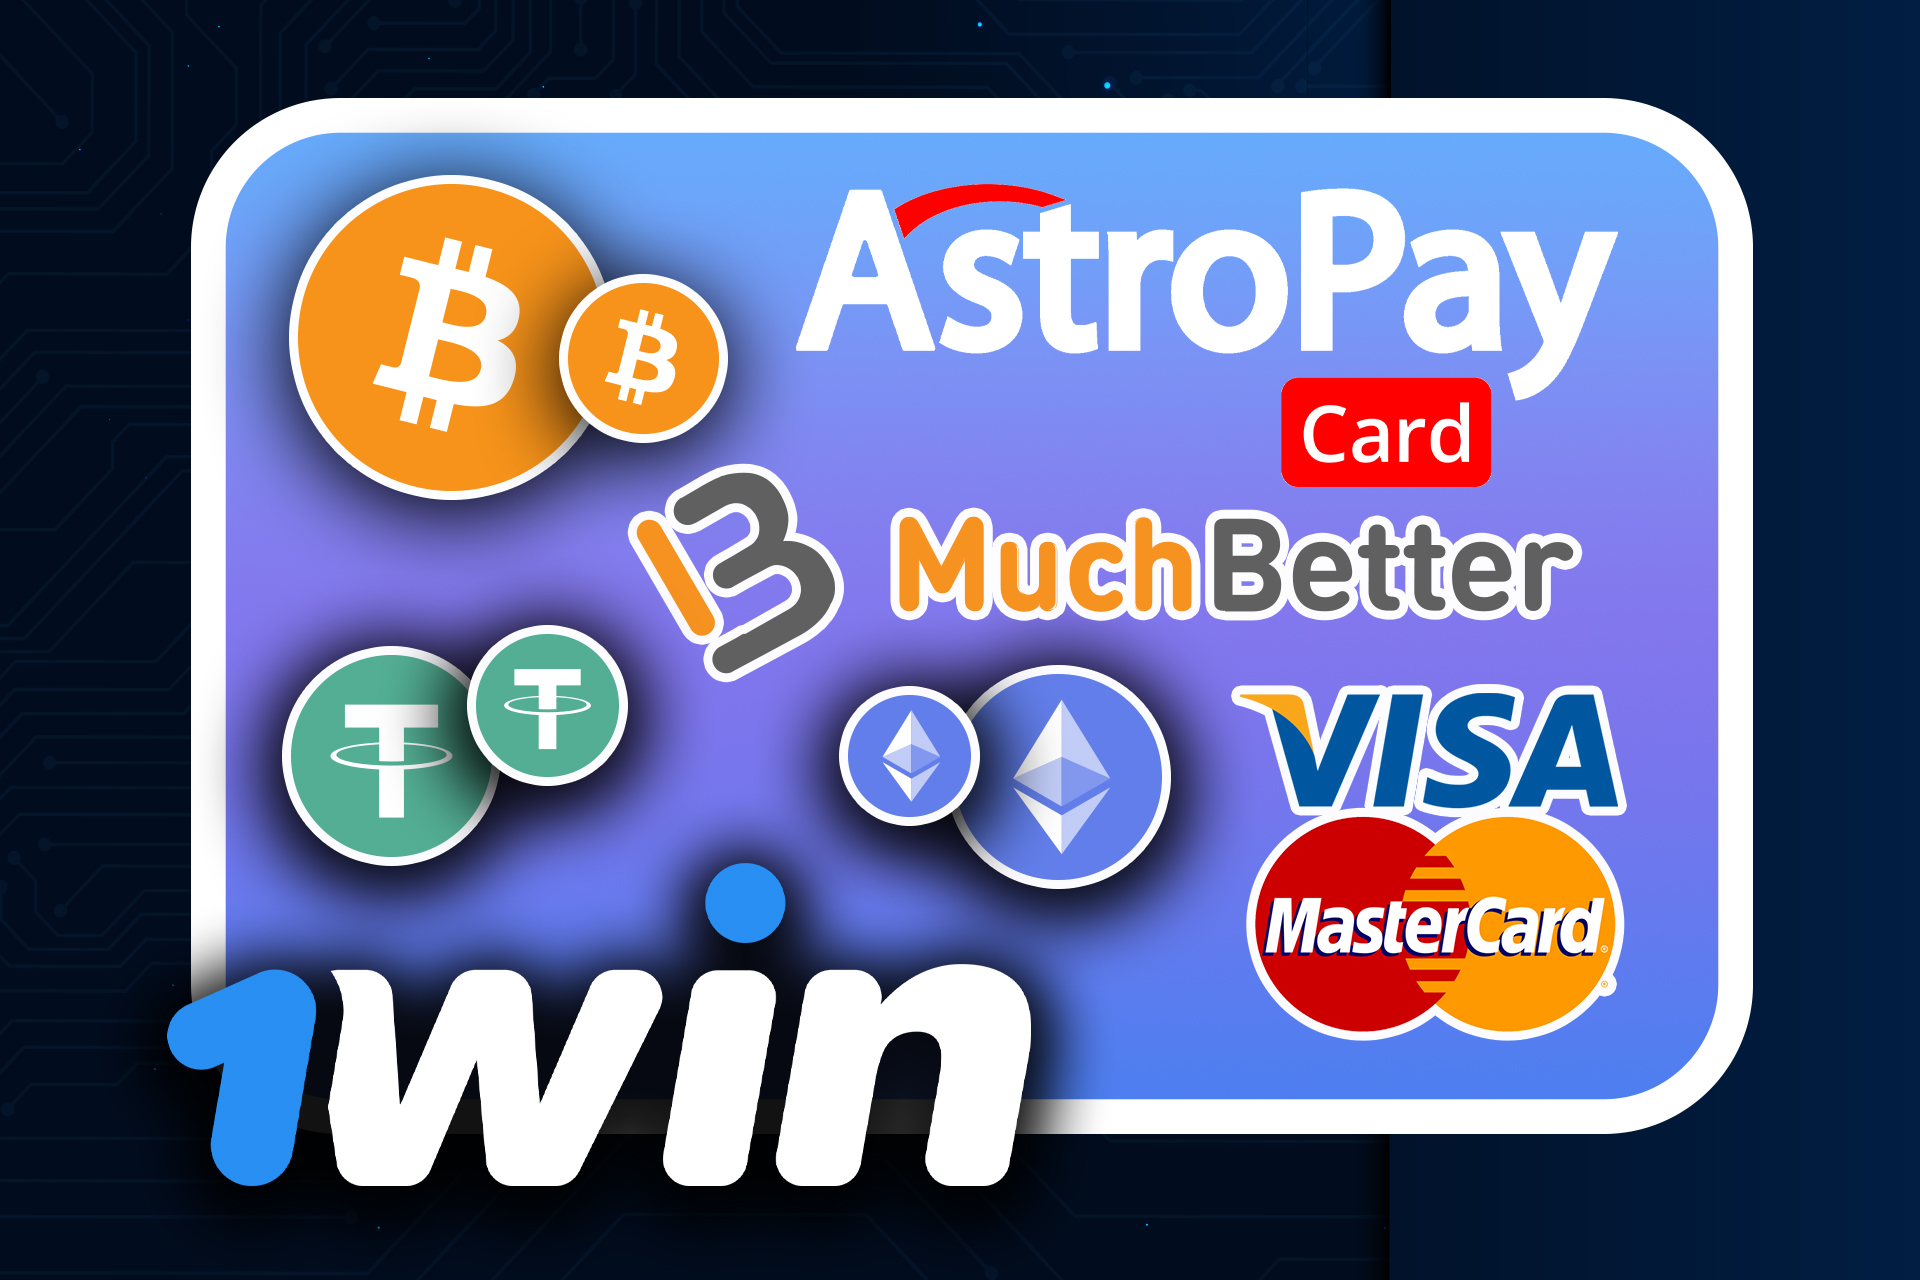 There are plenty of payment methods to make deposits and withdrawals on the 1win website.